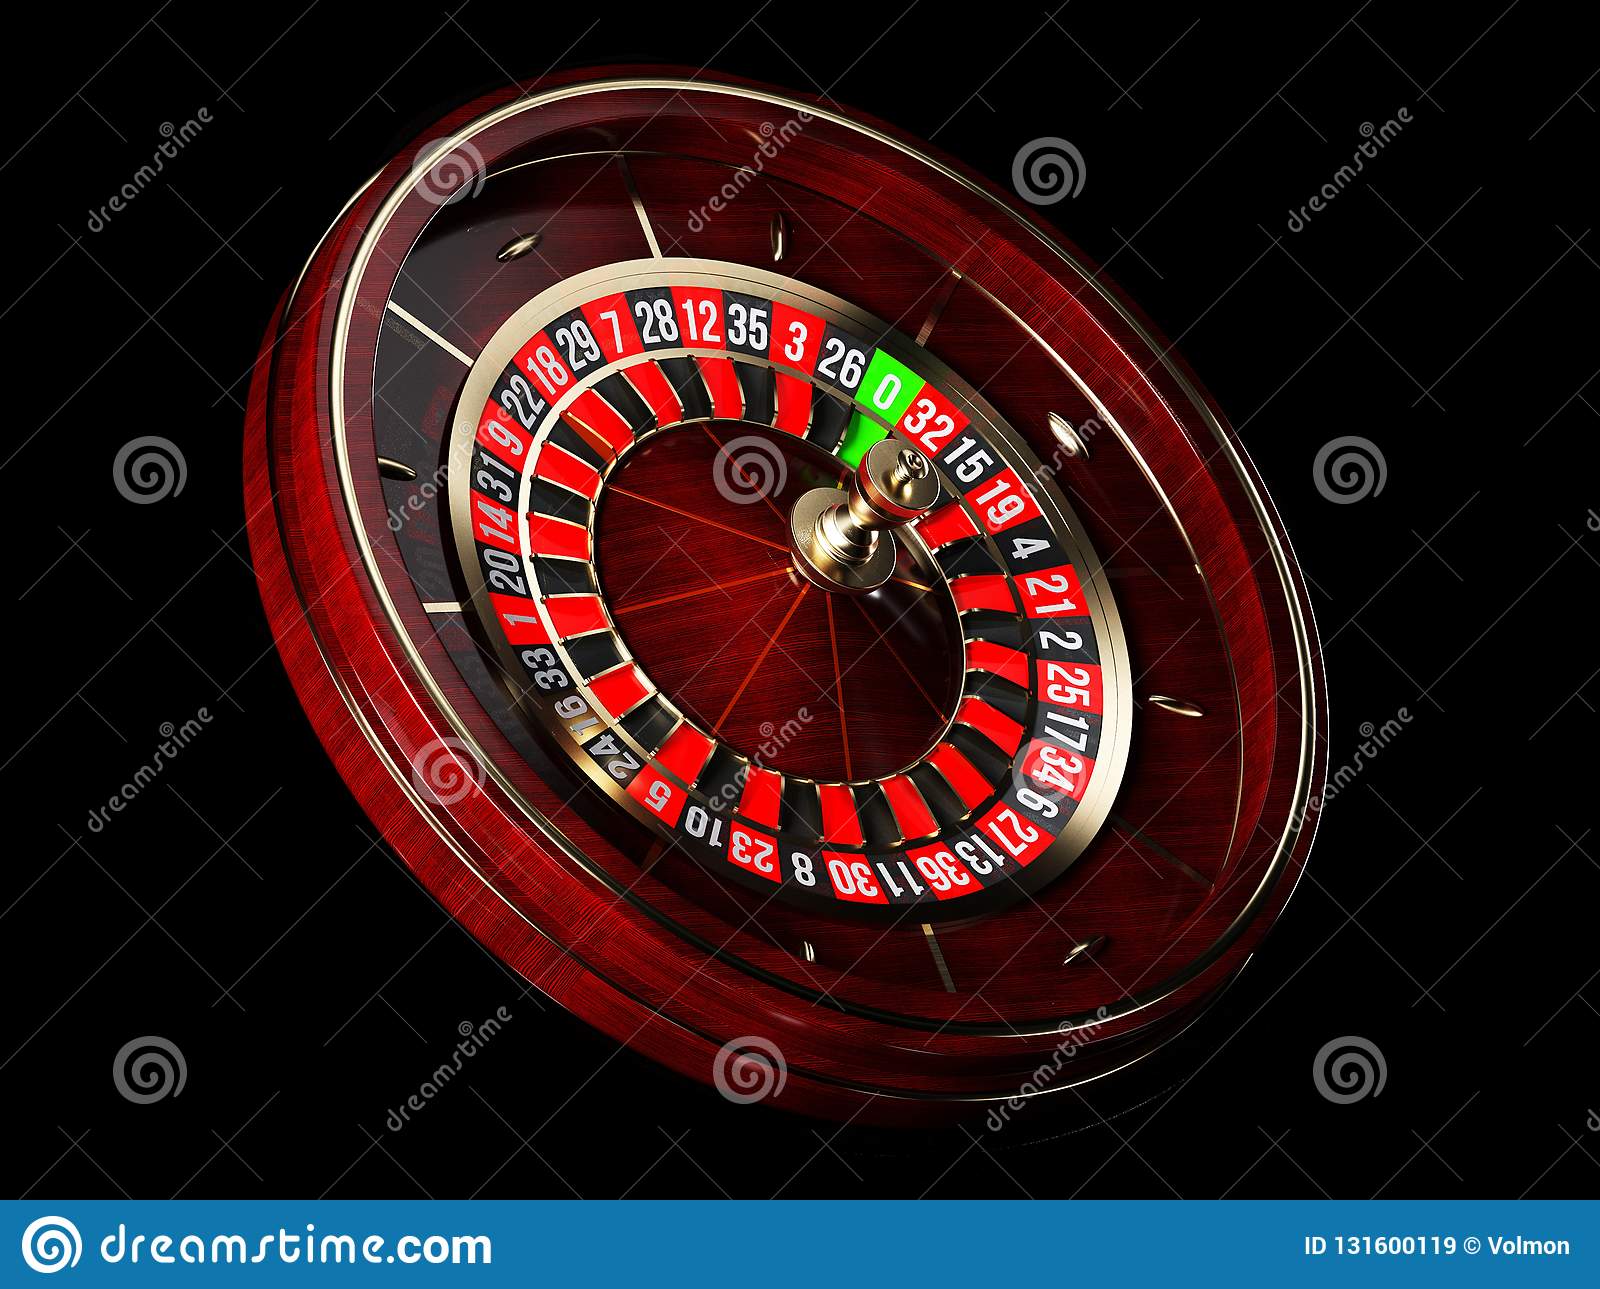 Up dl bitcoin slot booking